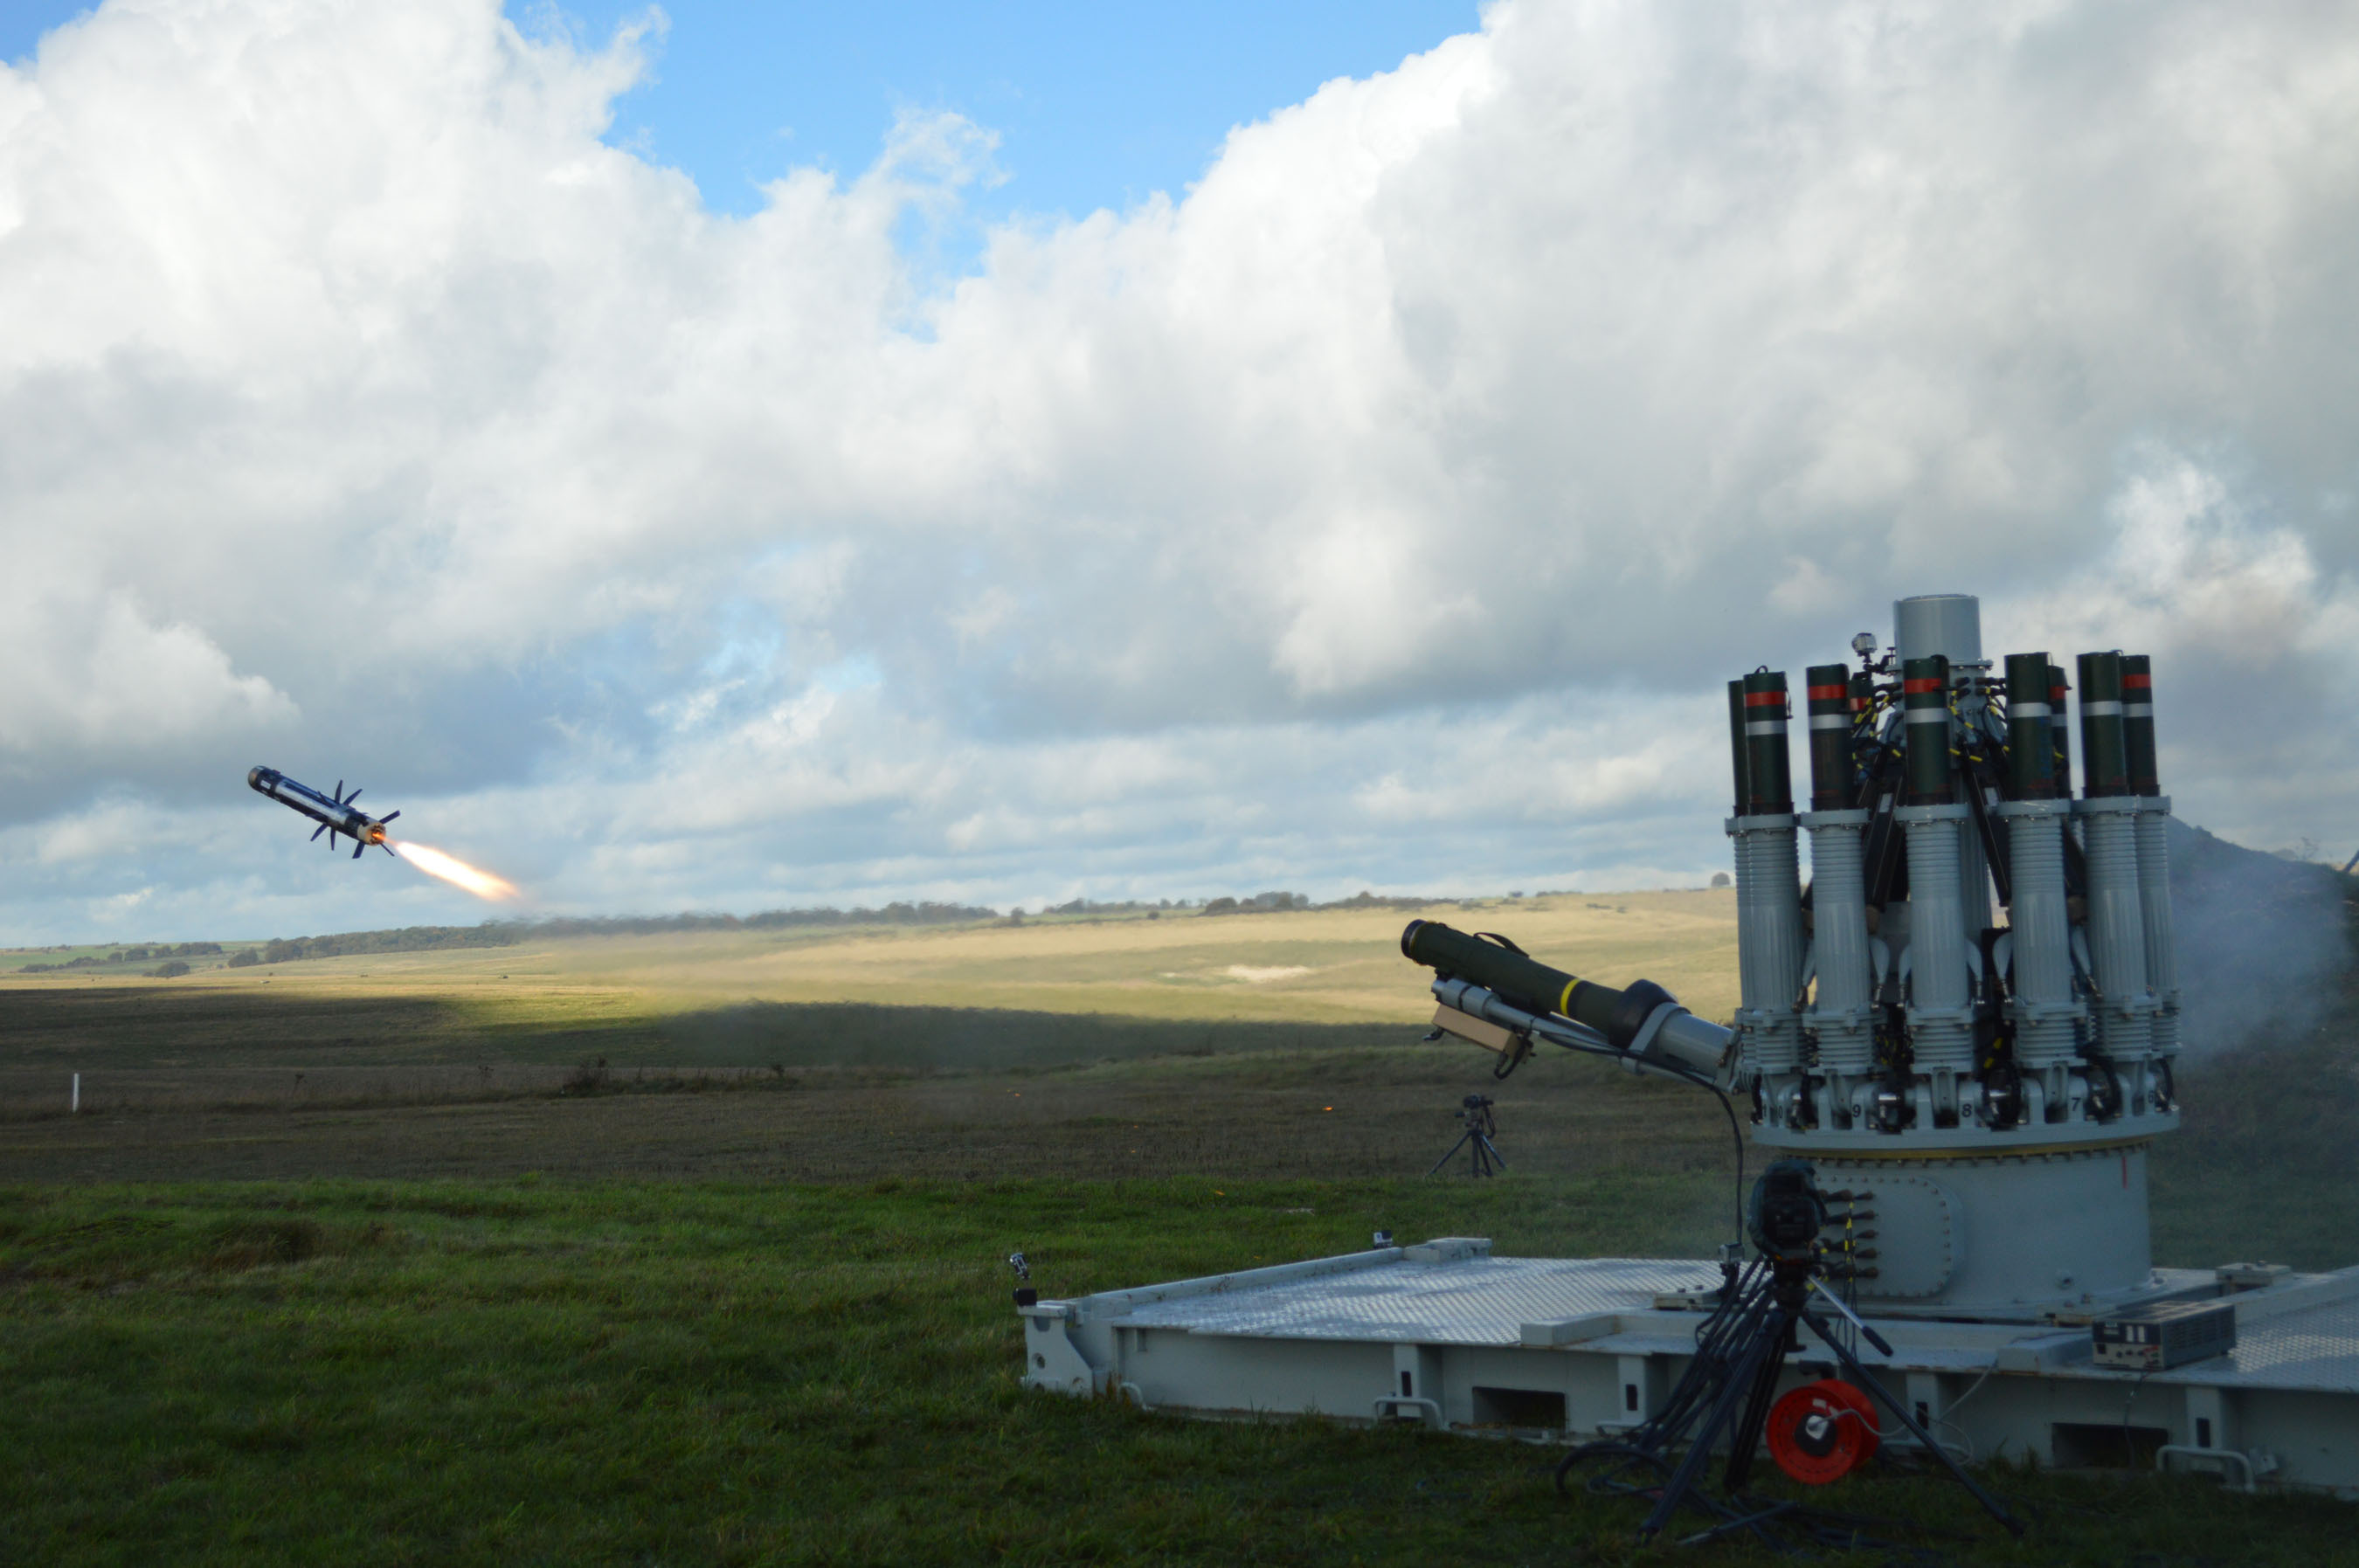 A Javelin missile is fired from Chemring's CENTURION(R) launcher during testing at the Defence Training Estate on Salisbury Plain in England.Raytheon-Chemring Countermeasures Photo. (PRNewsFoto/Raytheon Company) (PRNewsFoto/RAYTHEON COMPANY)